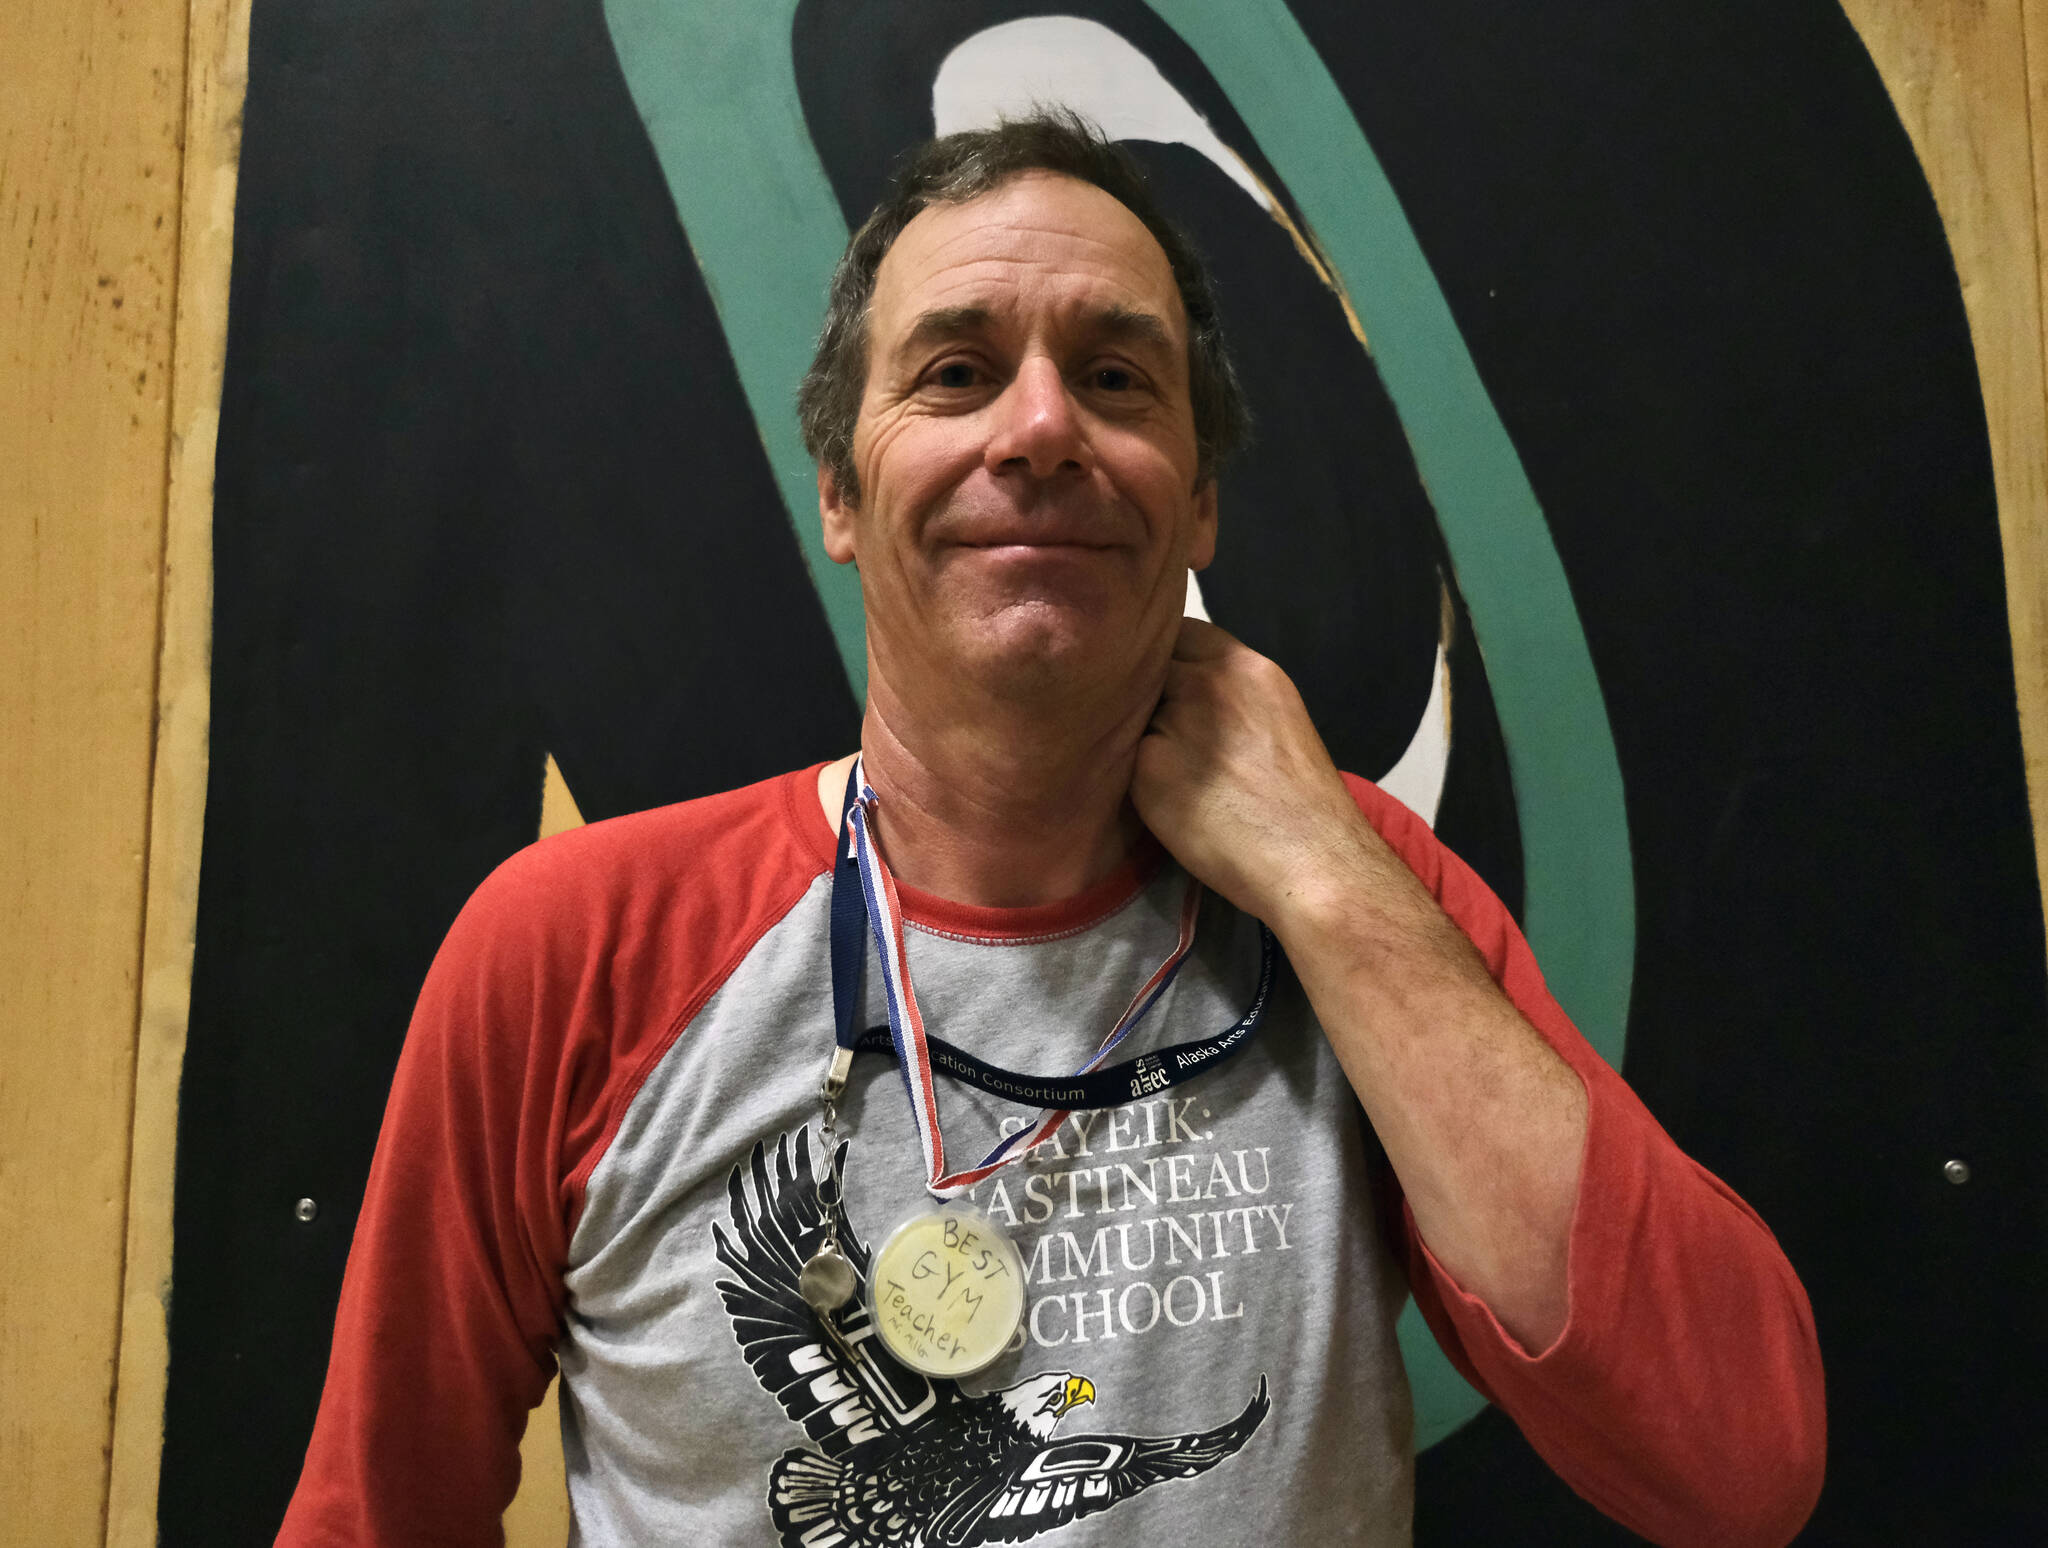 Sayéik: Gastineau Community School physical education teacher Dirk Miller displays one of his favorite awards on Thursday, a medal made by a student. Miller is retiring after 24 years at the school. (Klas Stolpe / Juneau Empire)